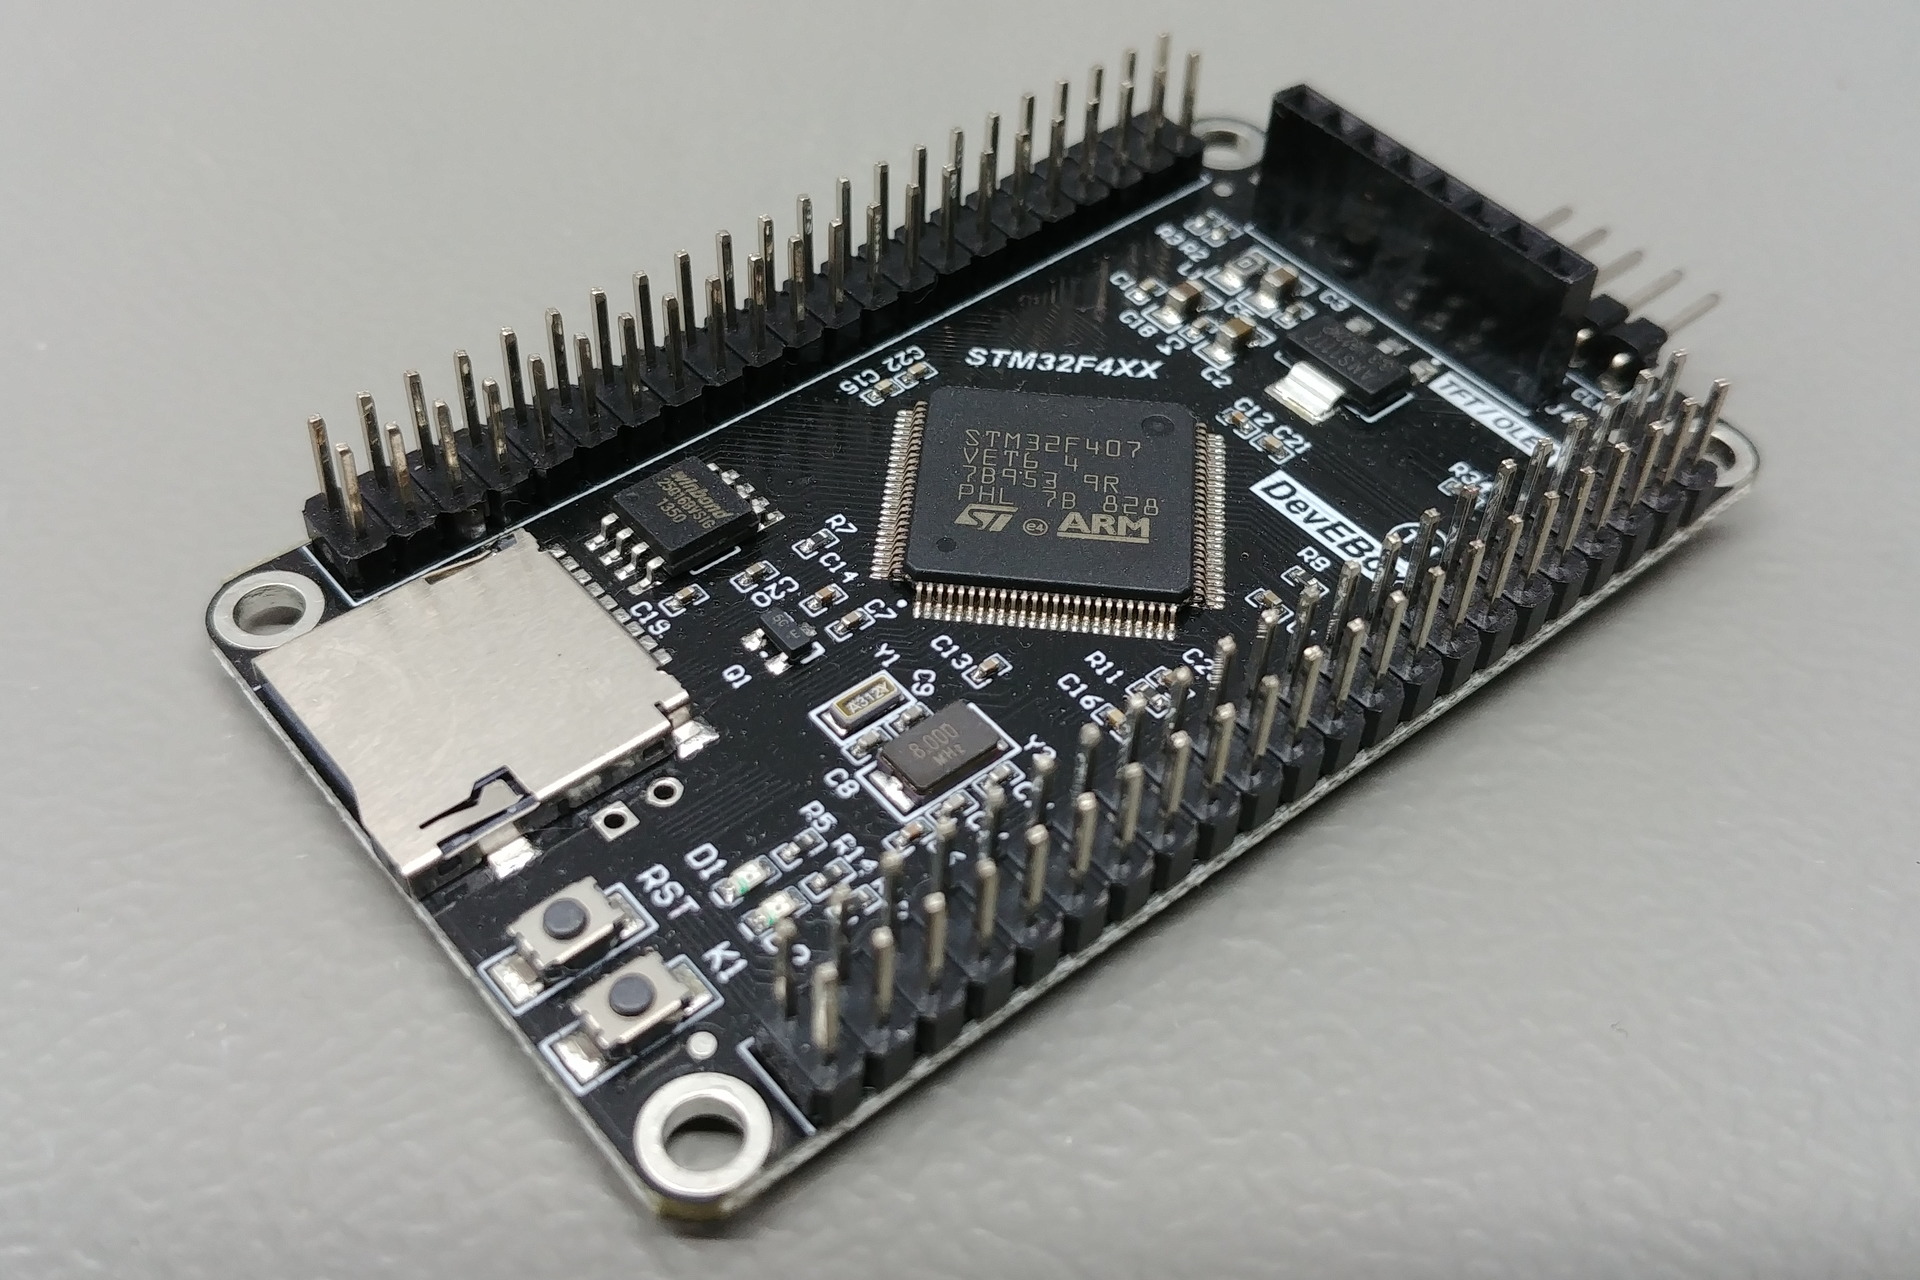 Picture of the STM32F4XX M